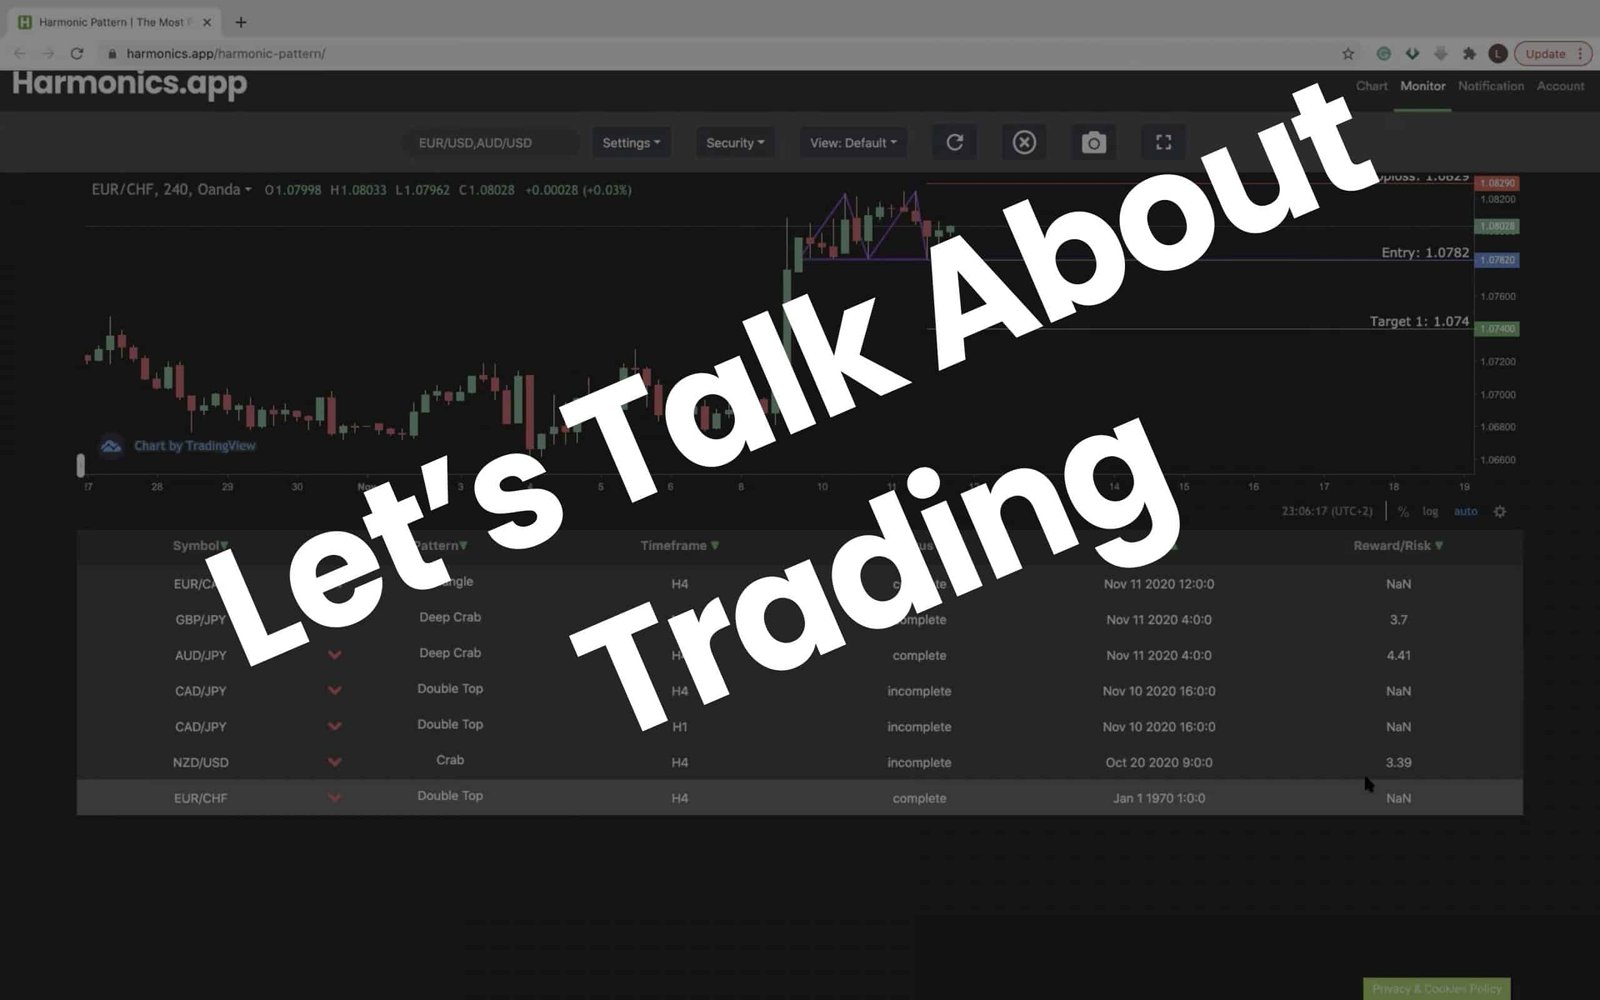 Let’s Talk About Trading